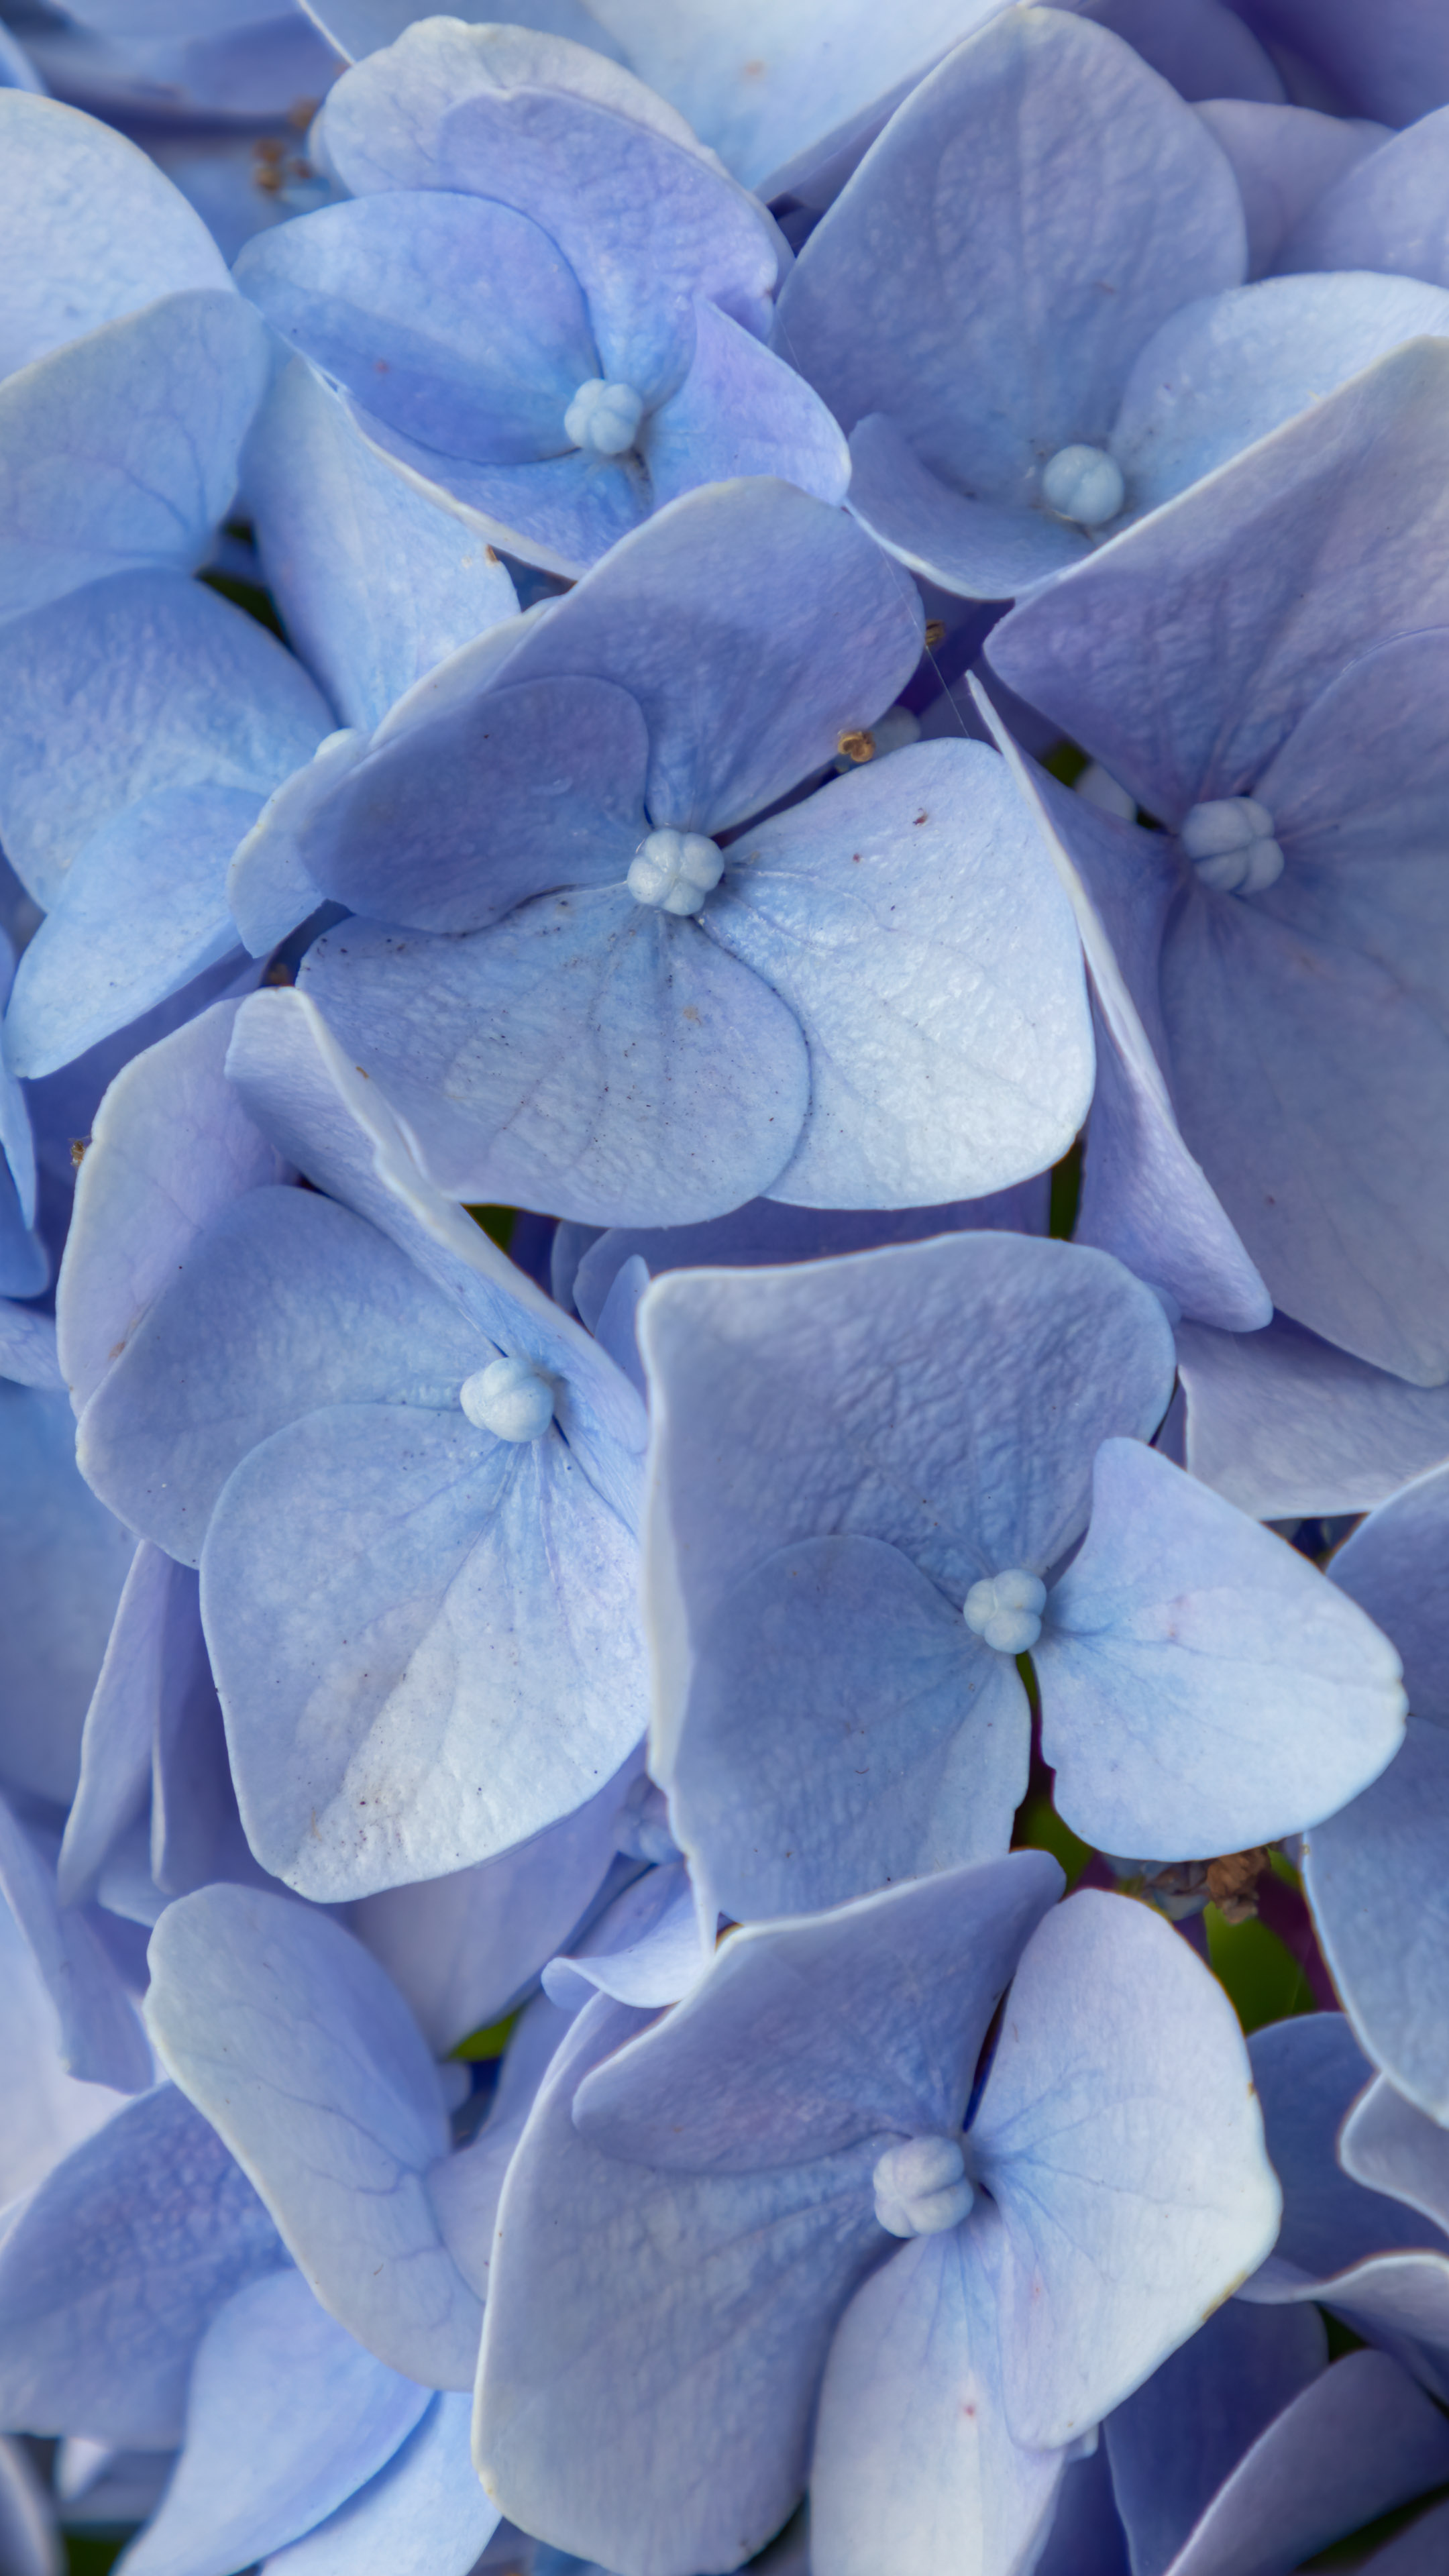 Immerse your smartphone in tranquility with a mesmerizing blue flower wallpaper.